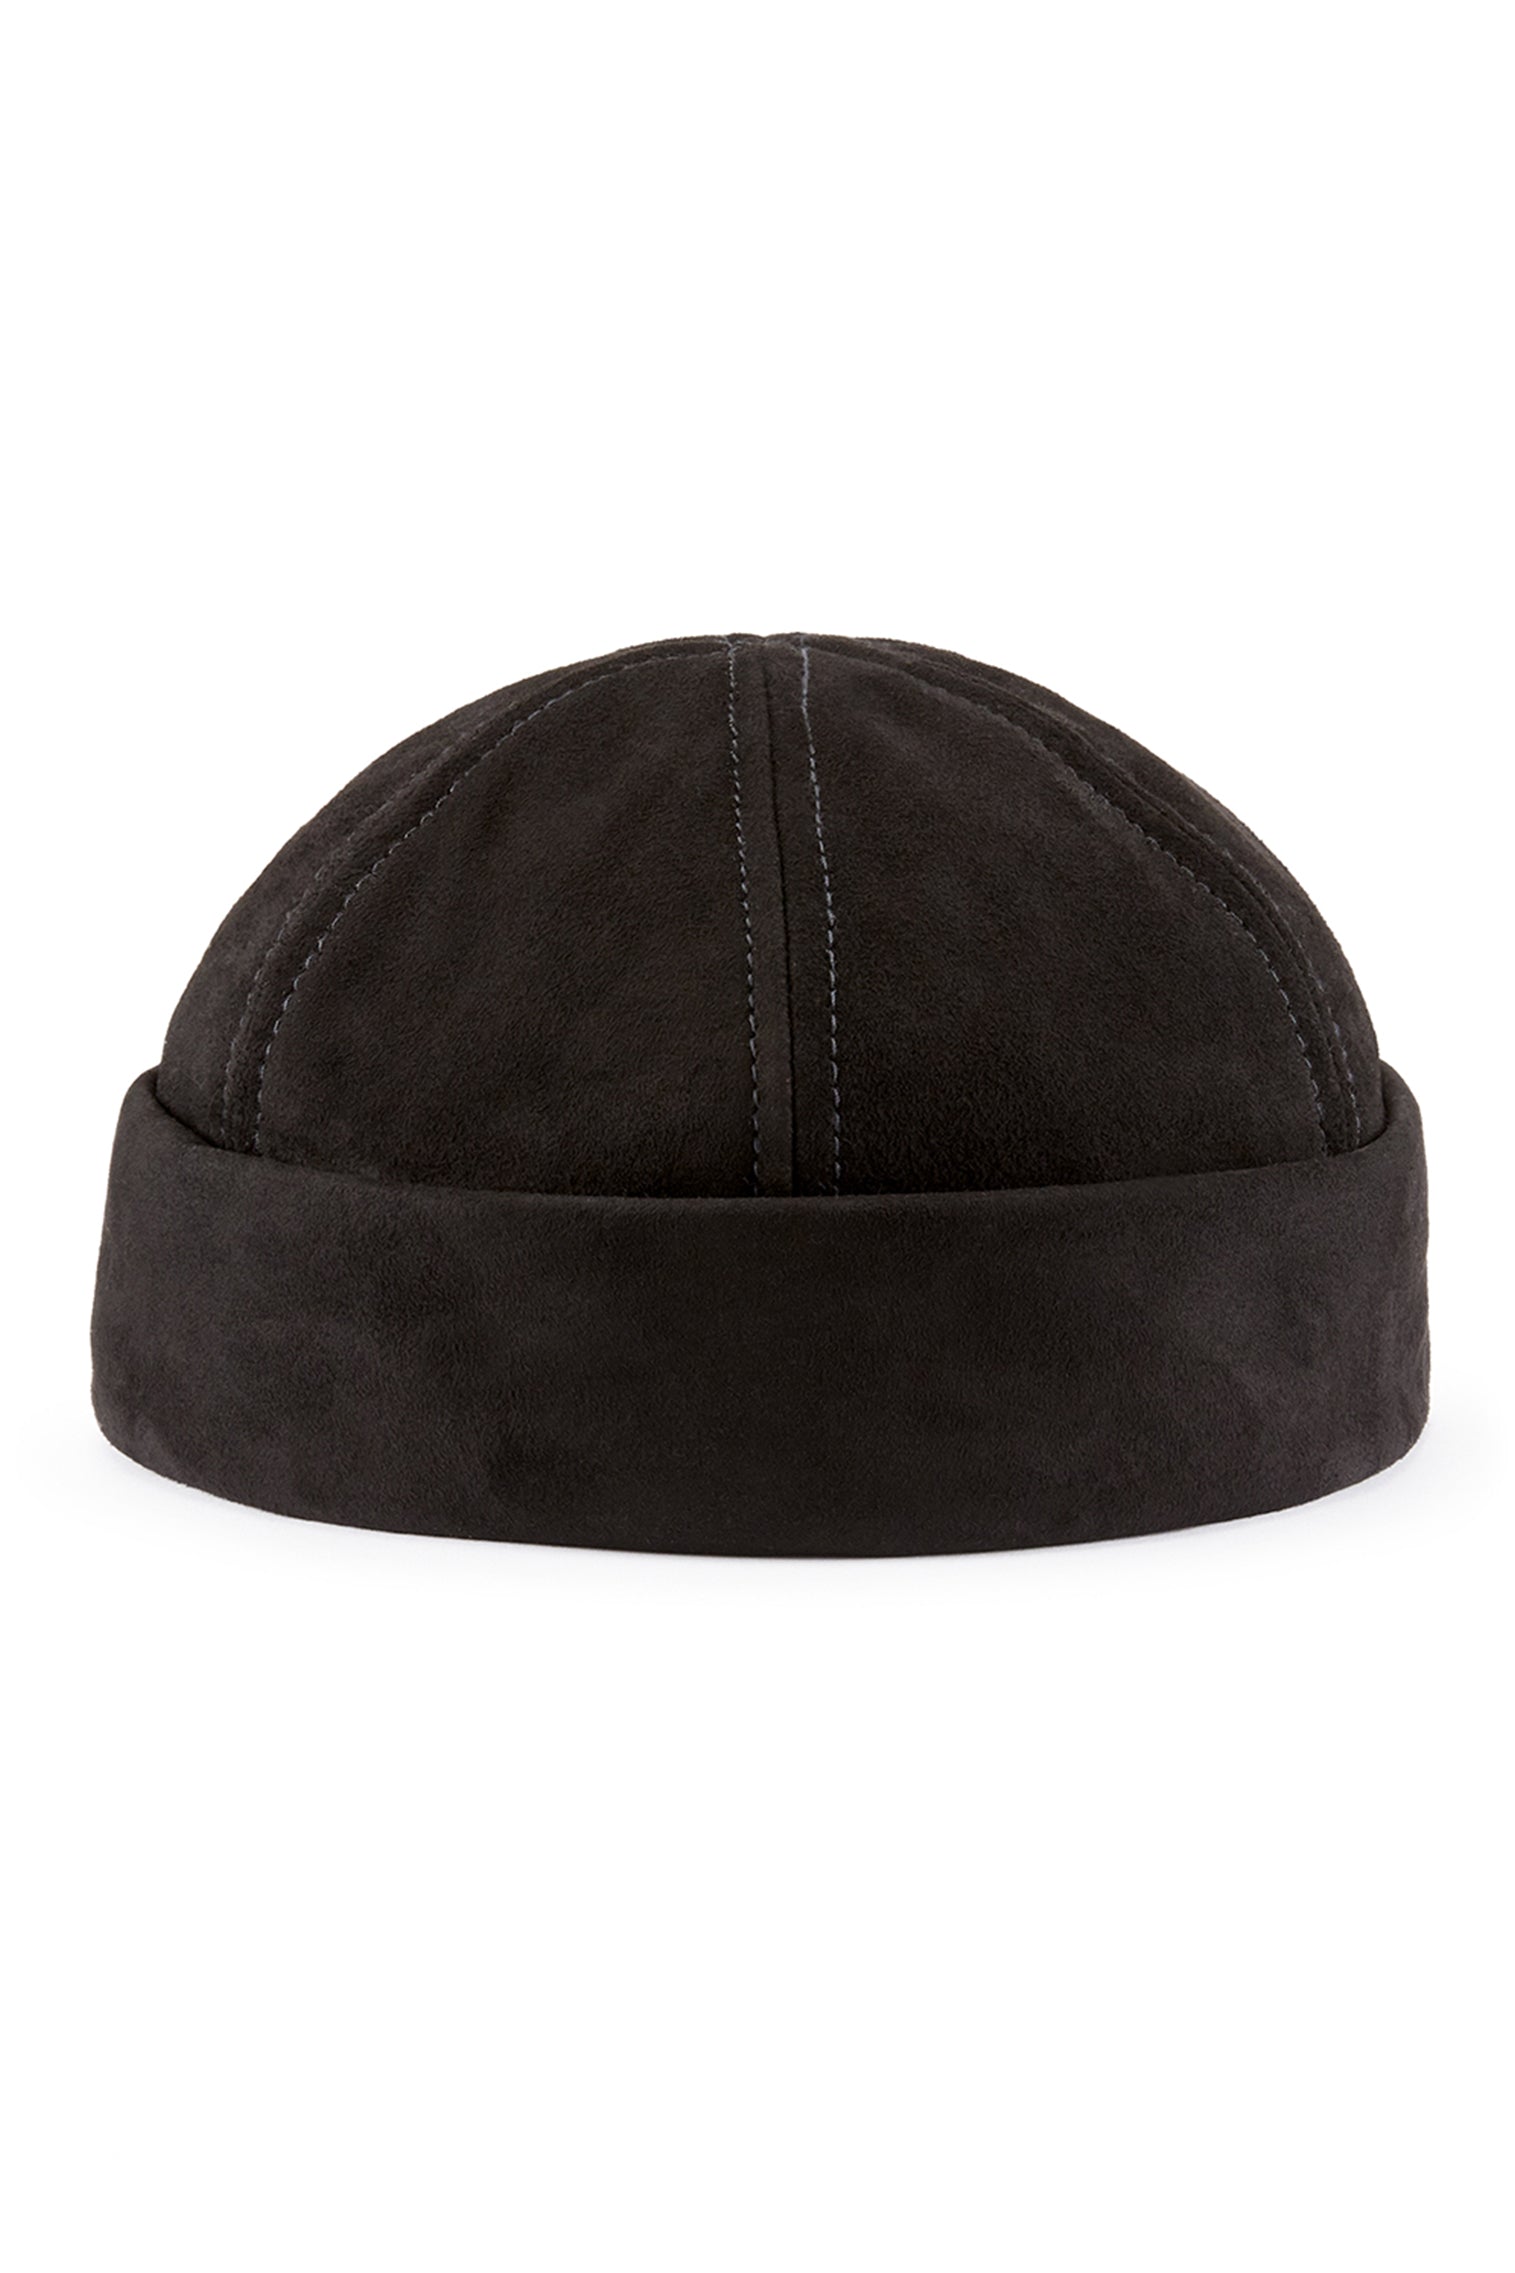 Dover Black Leather Watch Cap - Products - Lock & Co. Hatters London UK